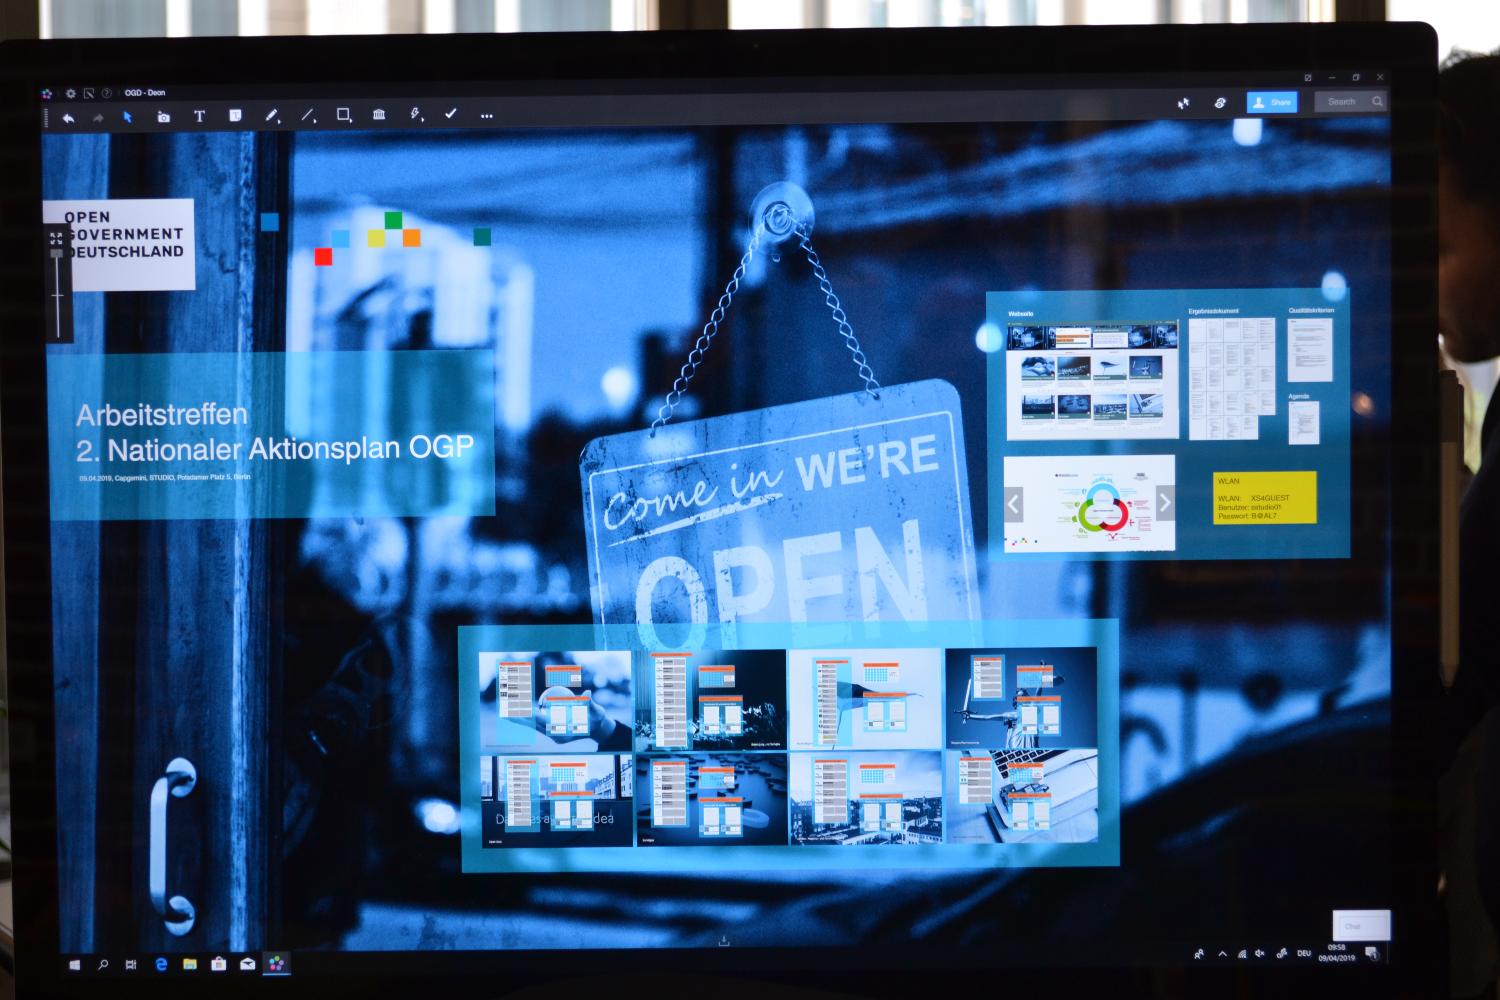 A screenshot shows the digital touch-screen interfaces of collaborative workspaces, in the background a "come in, we're open" sign is shown